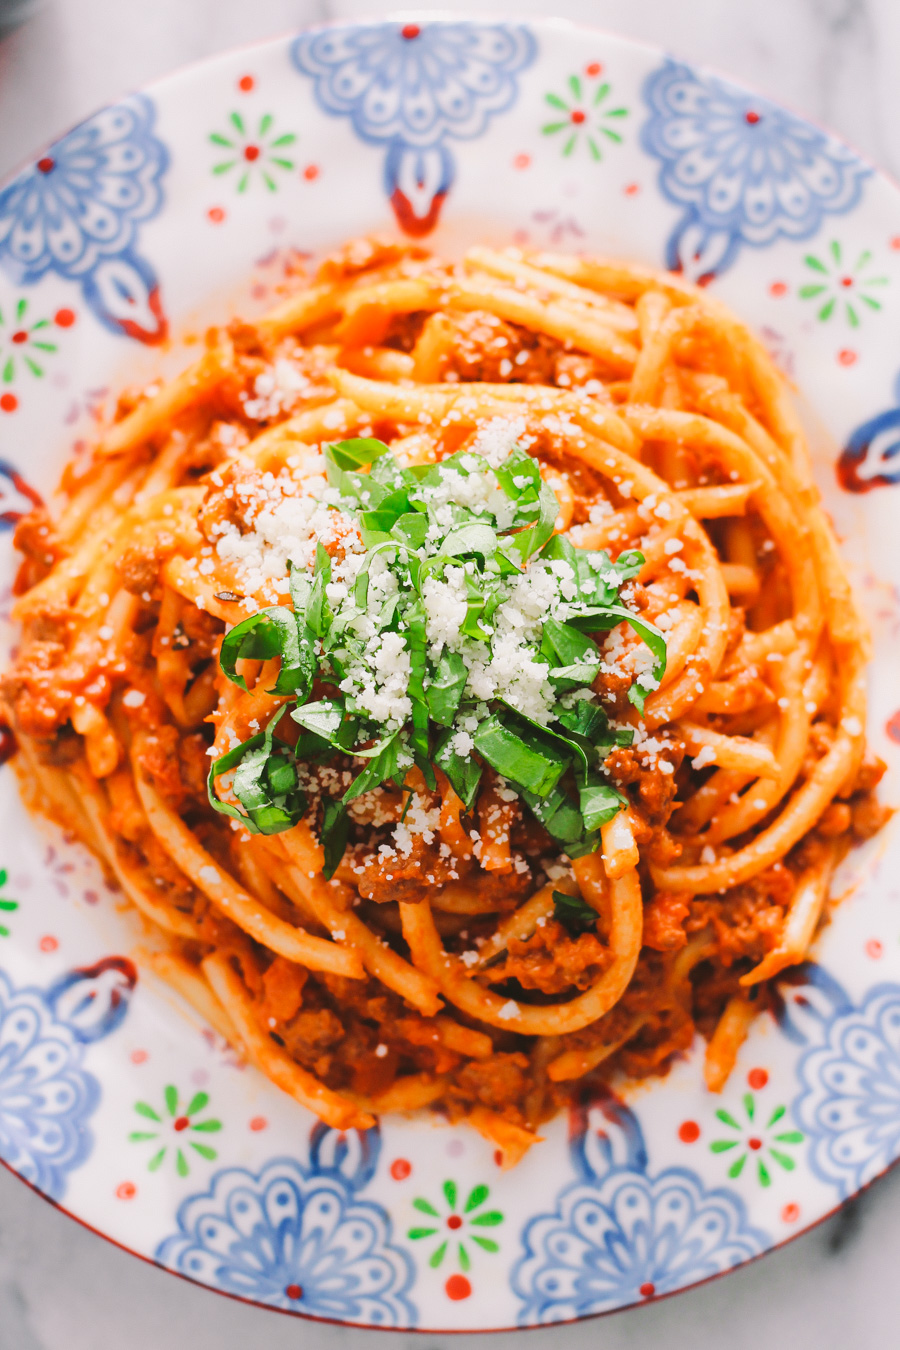 pasta bolognese with bucatini via playswellwithbutter | classic italian comfort food lightened up as a "fauxlognese" by using ground turkey & tons of veggies without compromising any of the flavor! bring an authentic taste of italy into your home with zero guilt!